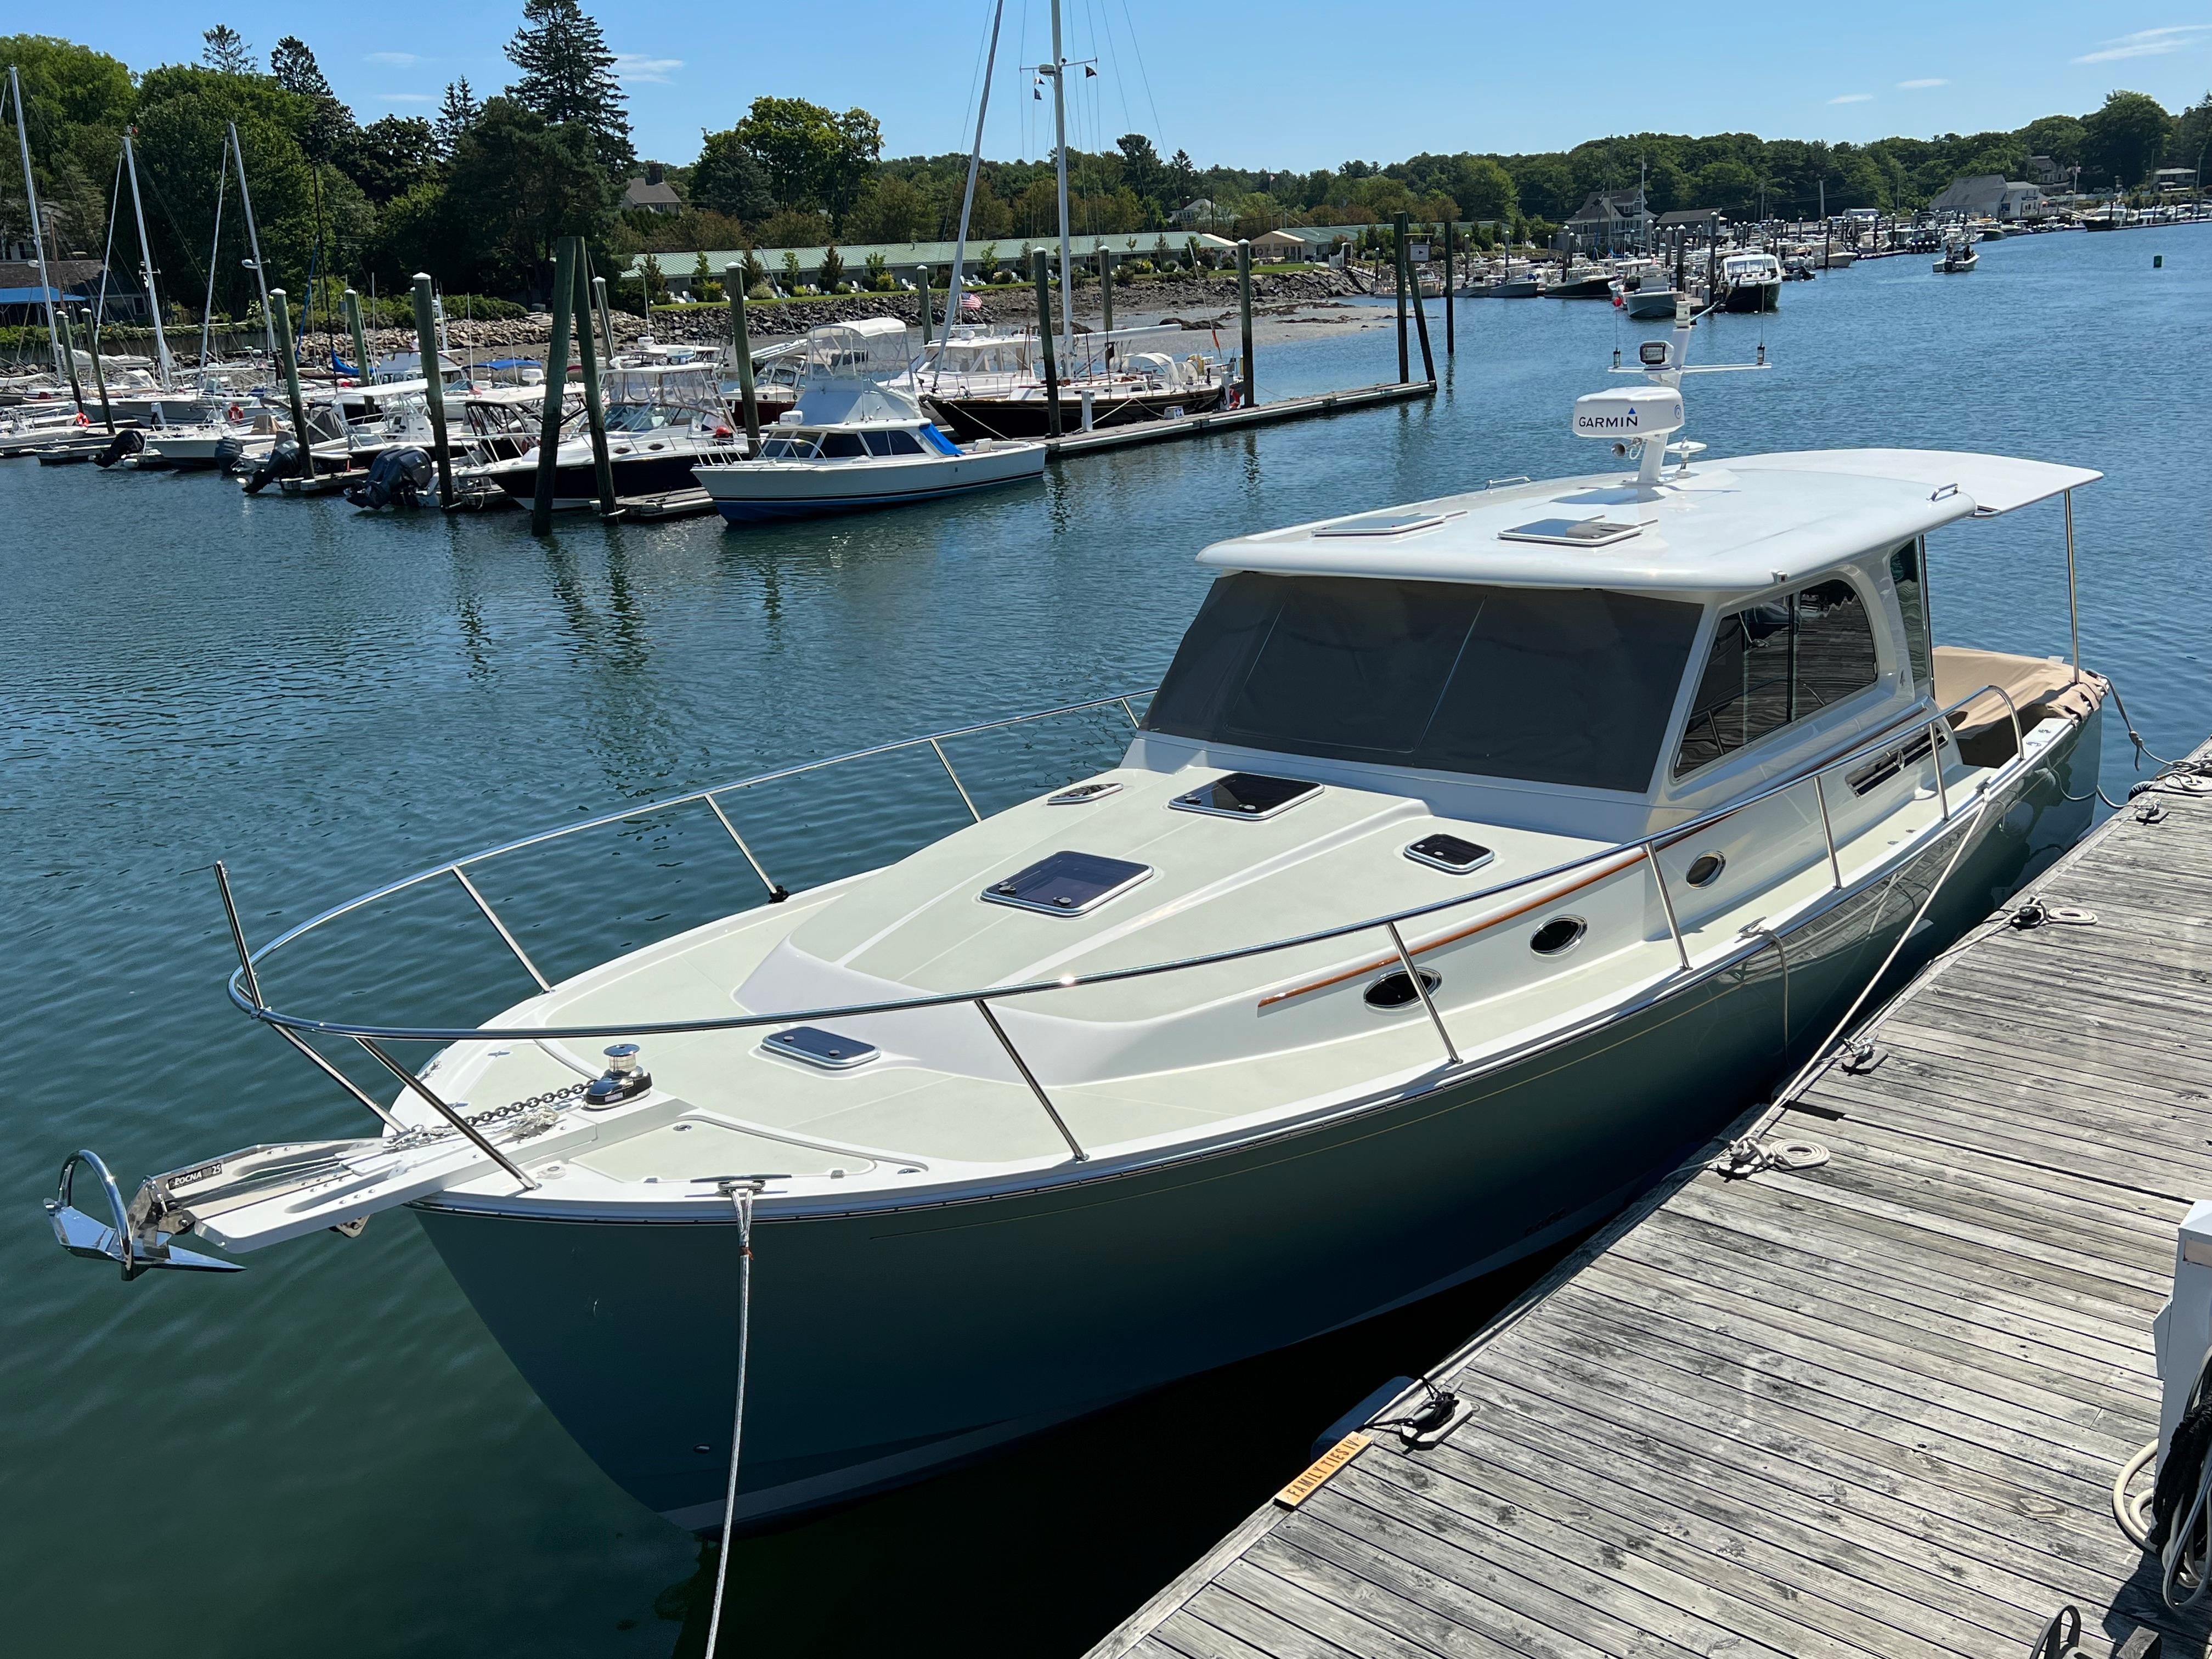 41 ft yachts for sale